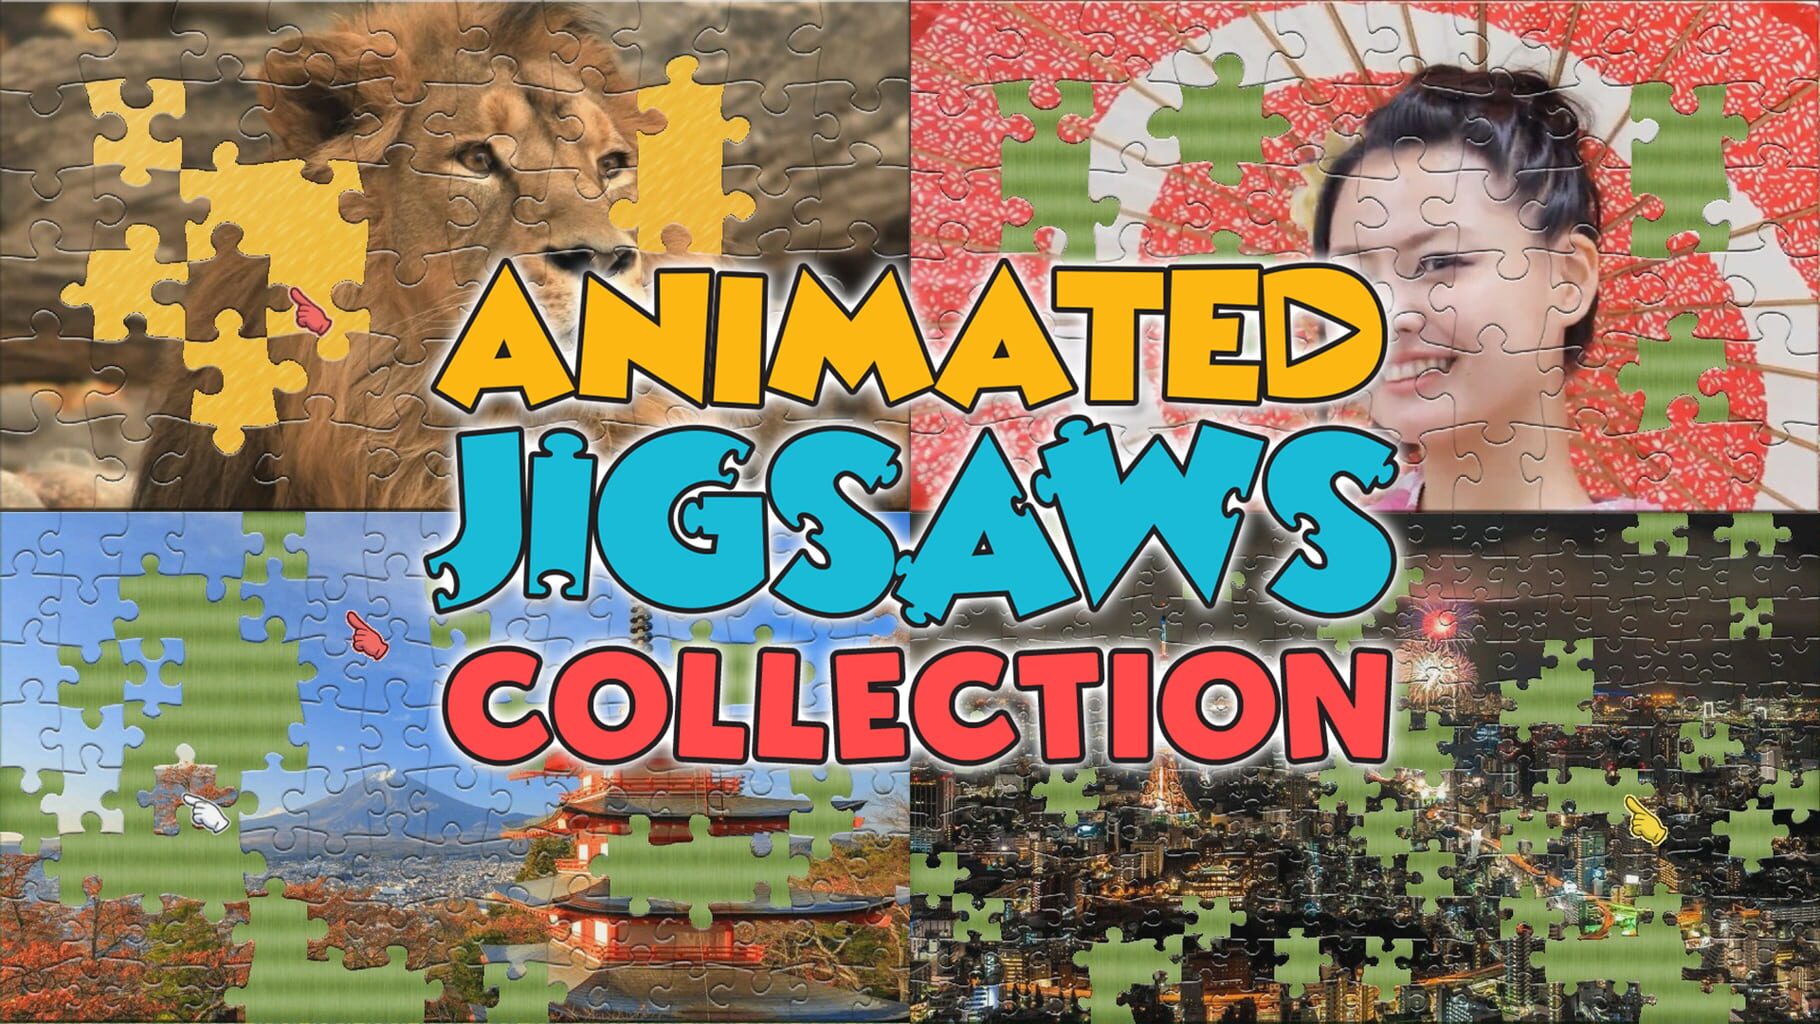 Animated Jigsaws Collection artwork